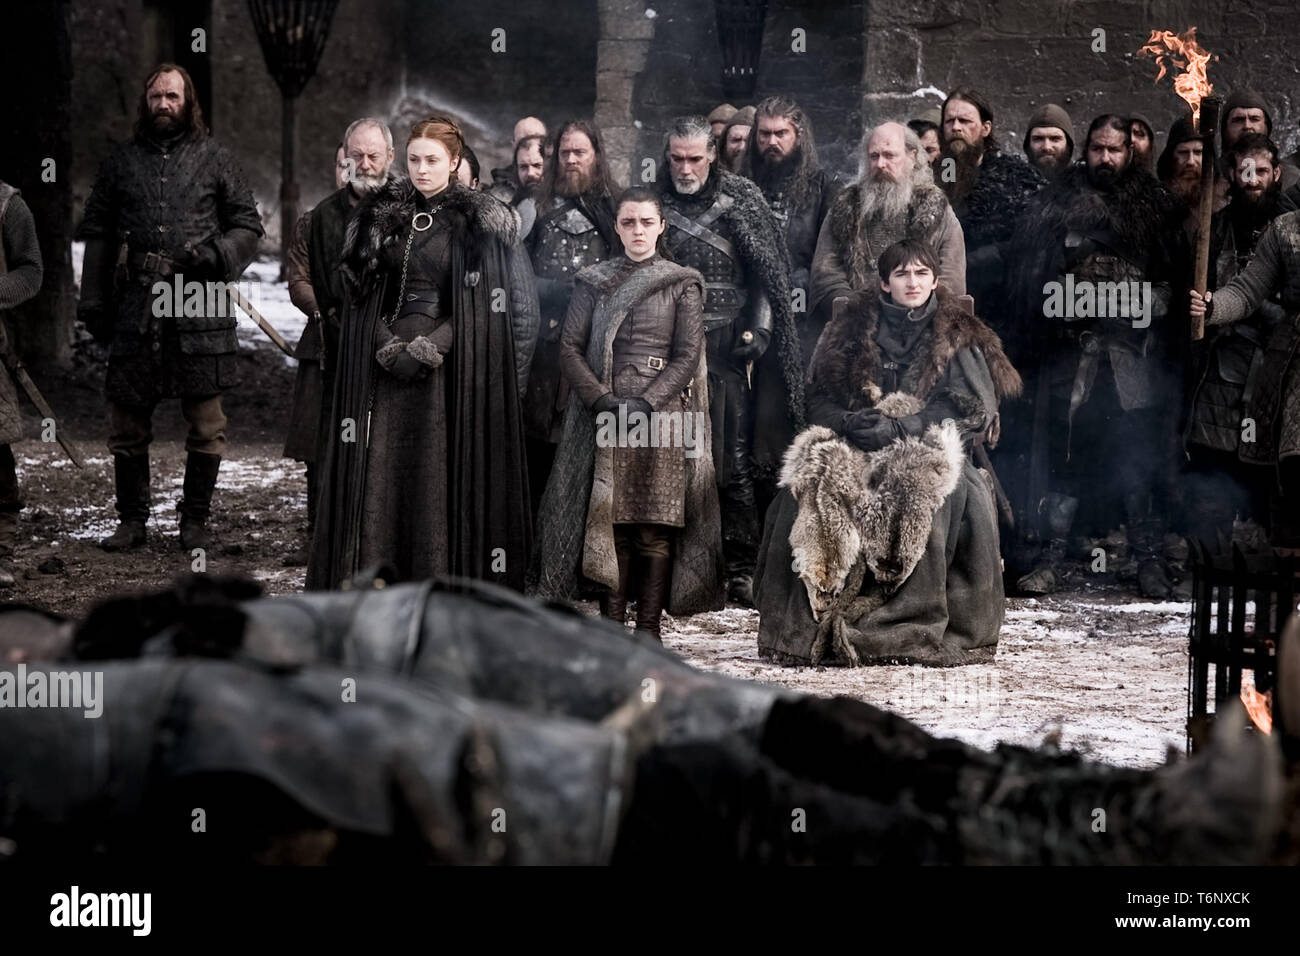 Rory McCann, Liam Cunningham, Sophie Turner, Maisie Williams, Isaac  Hemsptead Wright, 'Game of Thrones' Saison 8, épisode 4 (2019) Crédit photo  : HBO / Les archives d'Hollywood Photo Stock - Alamy